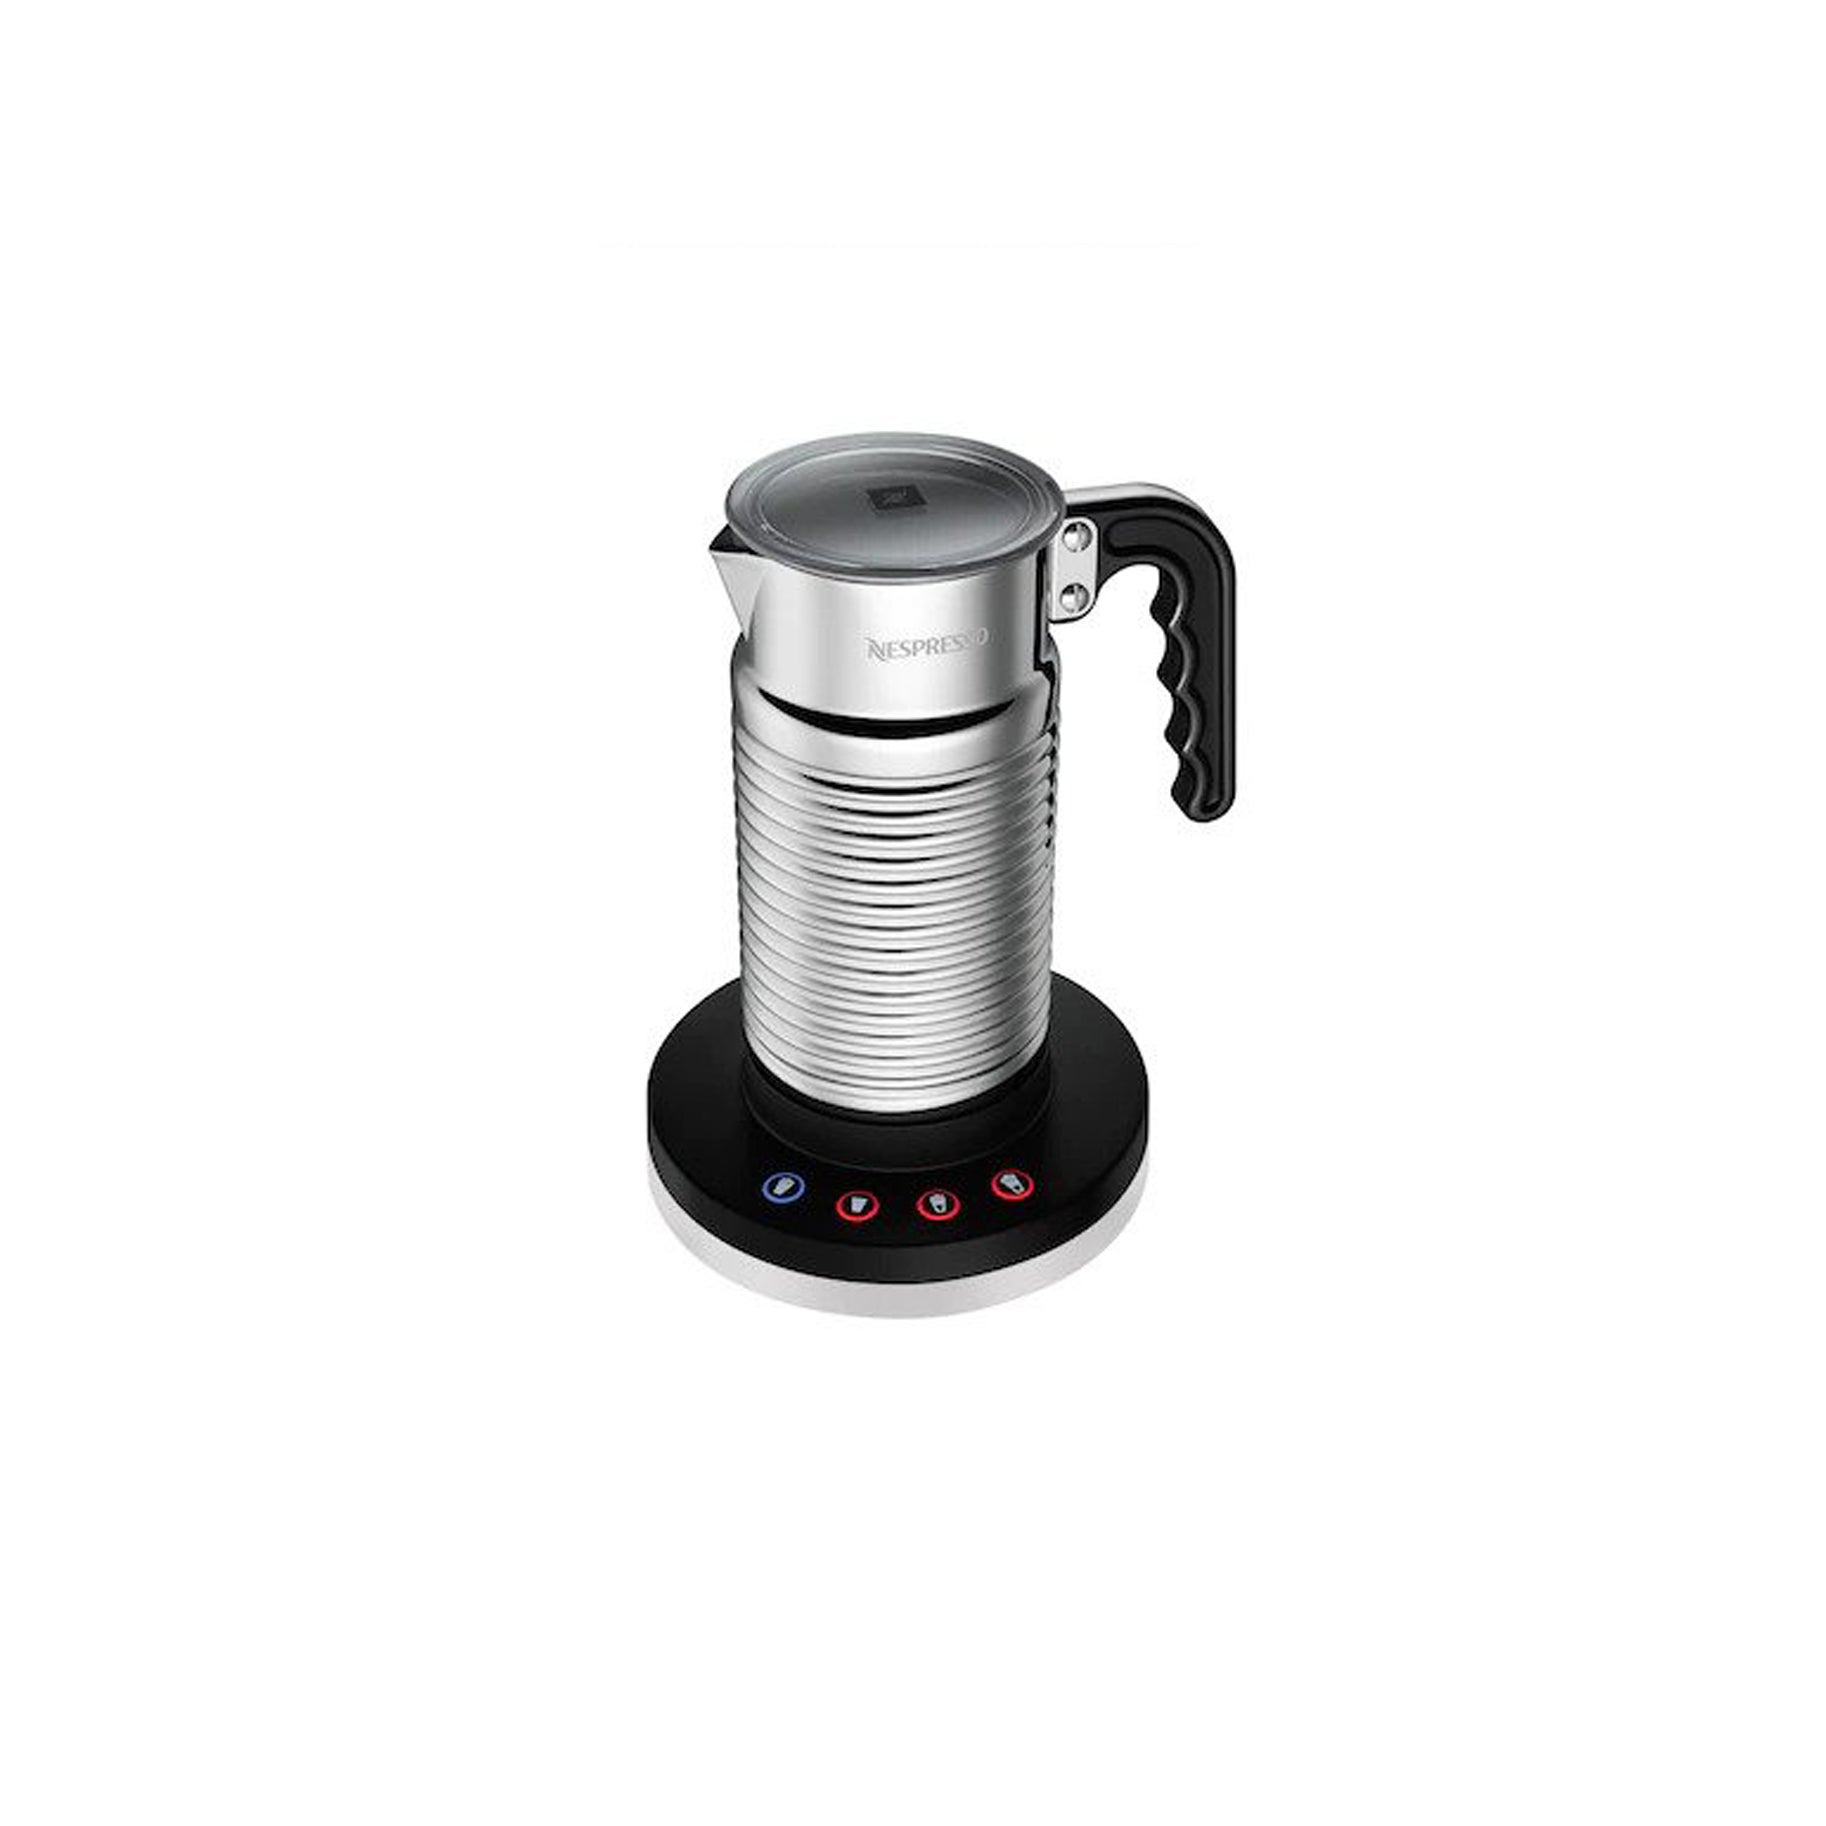 Milk frother, powerful and durable 380 ml whipping cream Dazzling